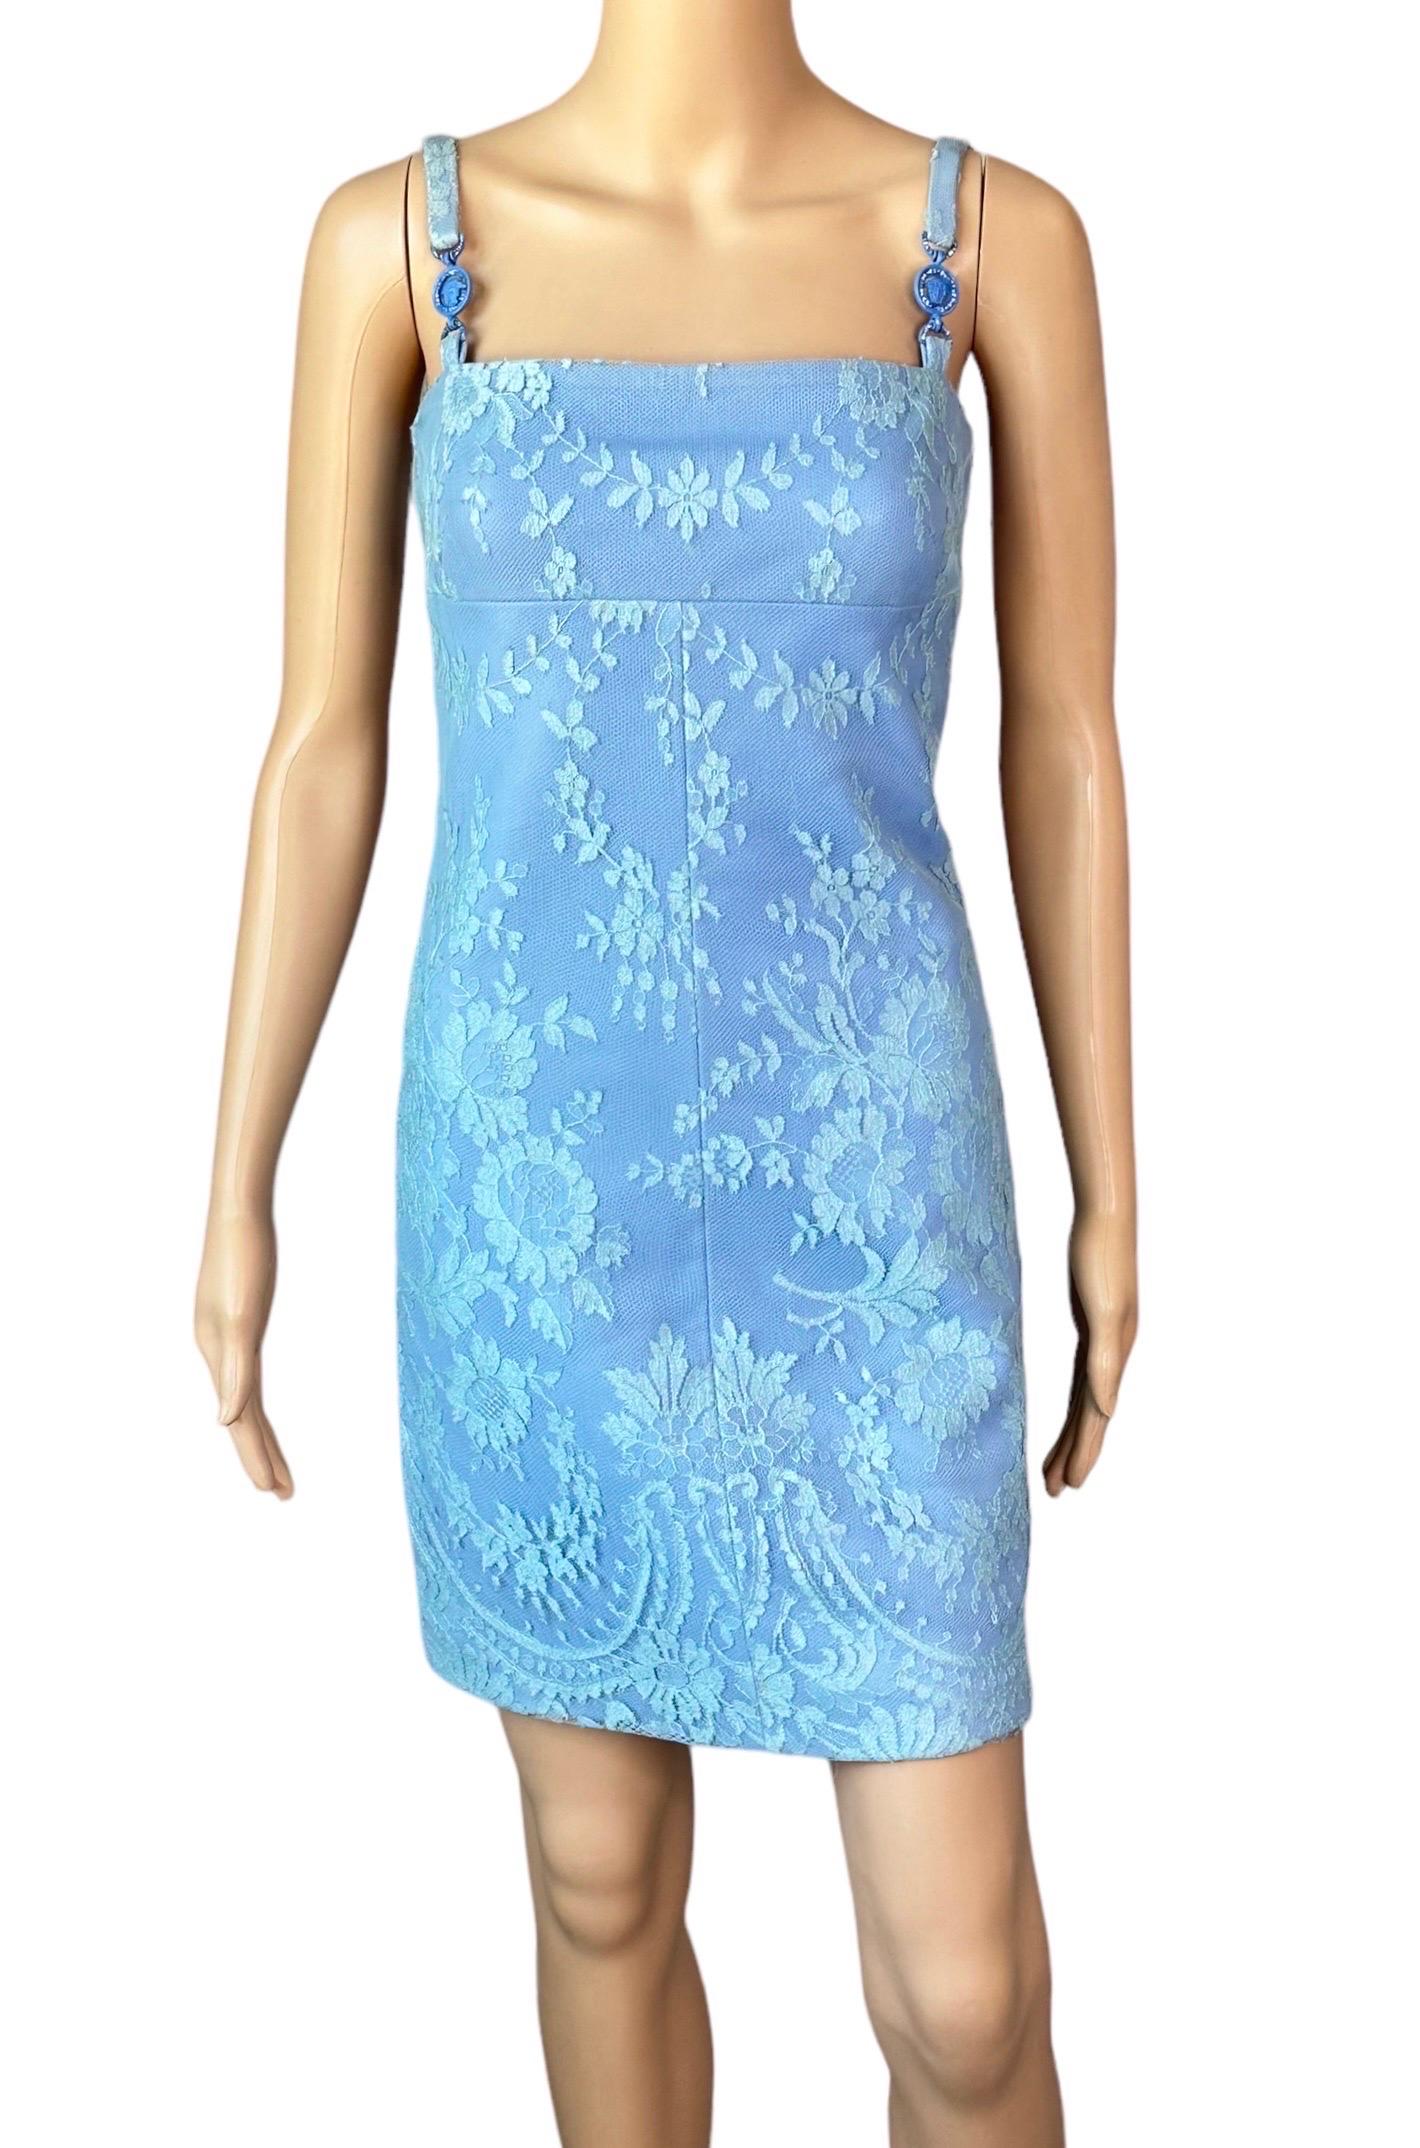 Gianni Versace F/W 1996 Vintage Floral Lace and Leather Blue Mini Dress  In Good Condition For Sale In Naples, FL